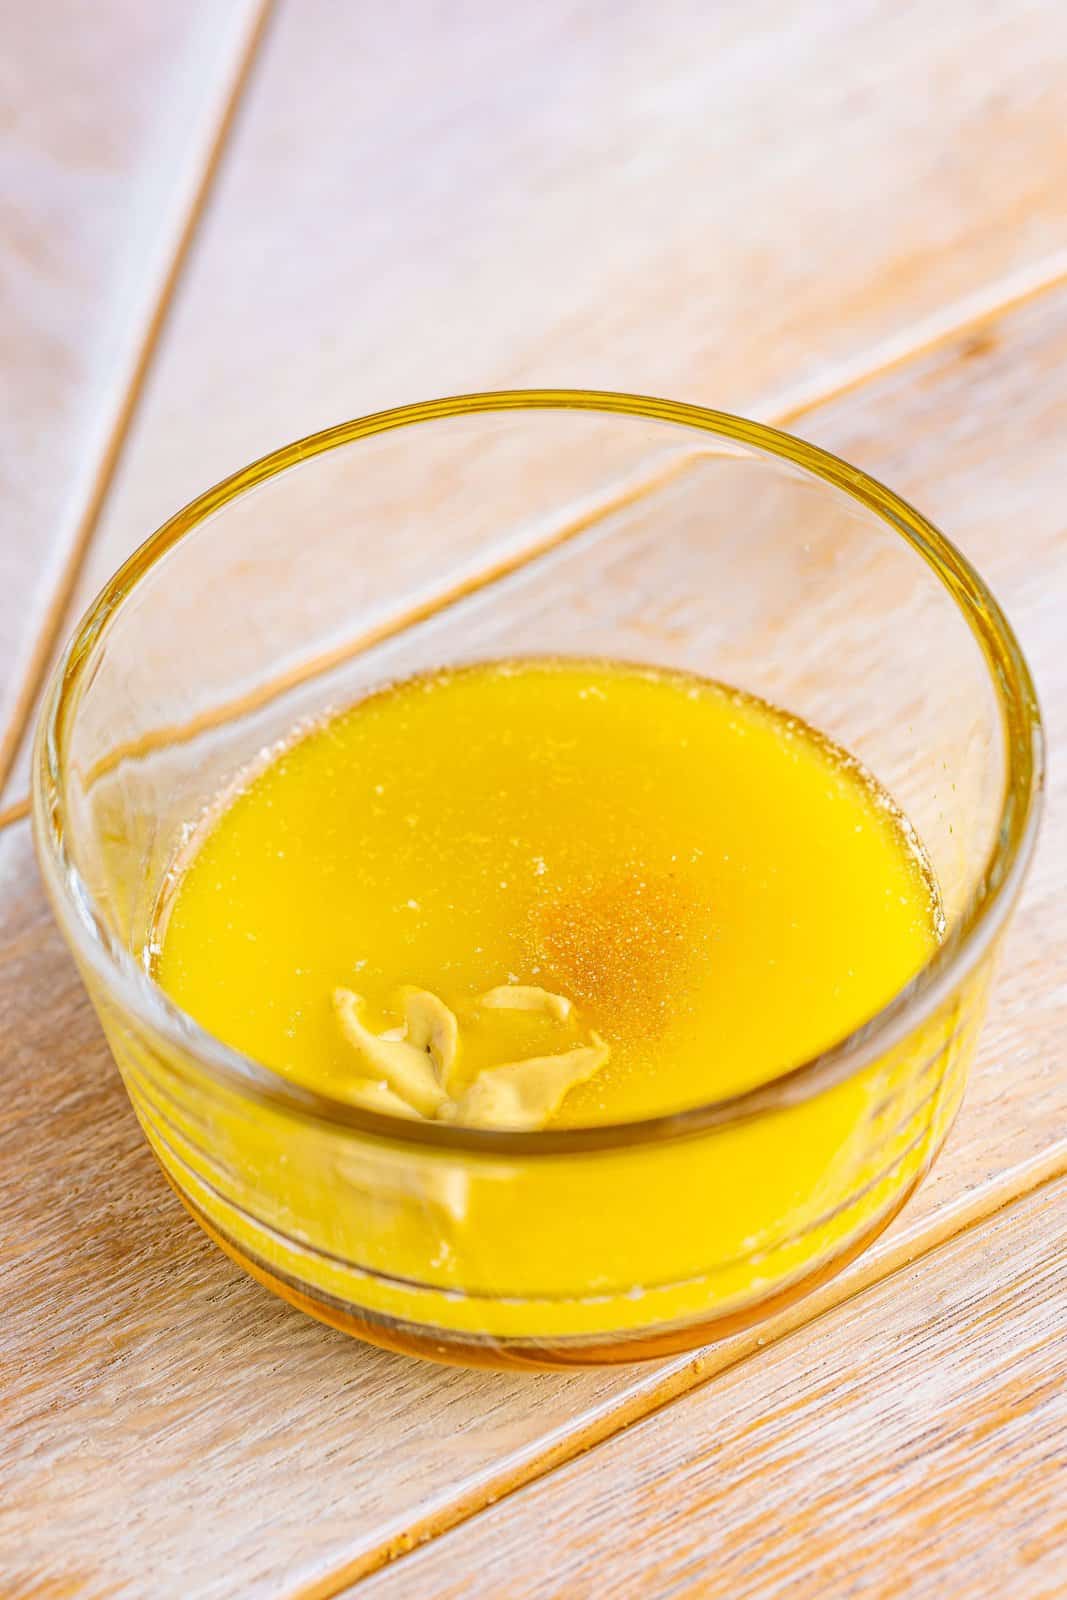 Melted butter, honey, dijon mustard and garlic powder in a small glass bowl.